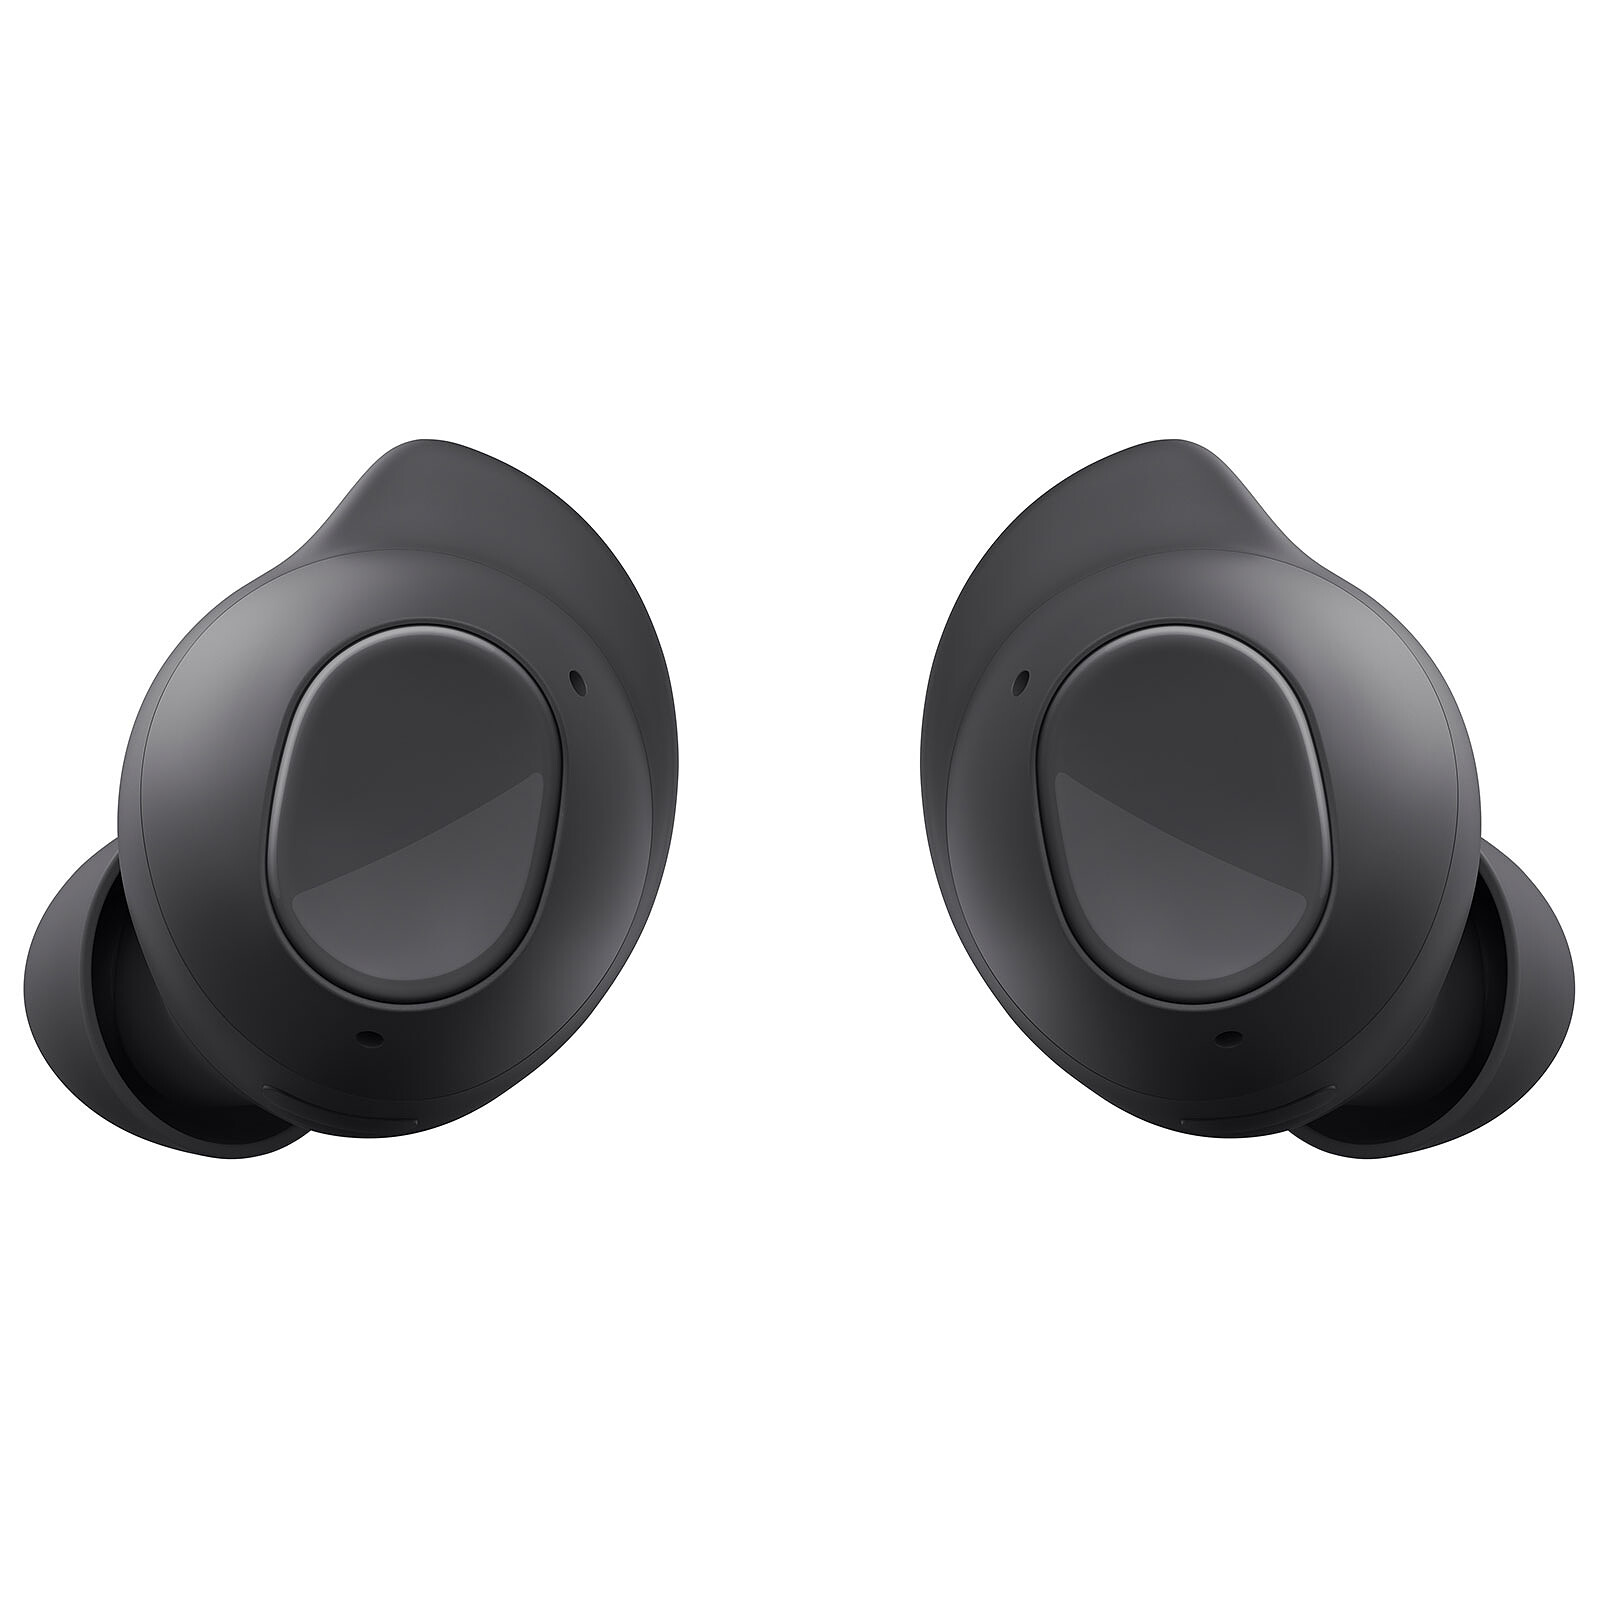 Samsung Galaxy Buds 2 at their lowest ever price in 's Black